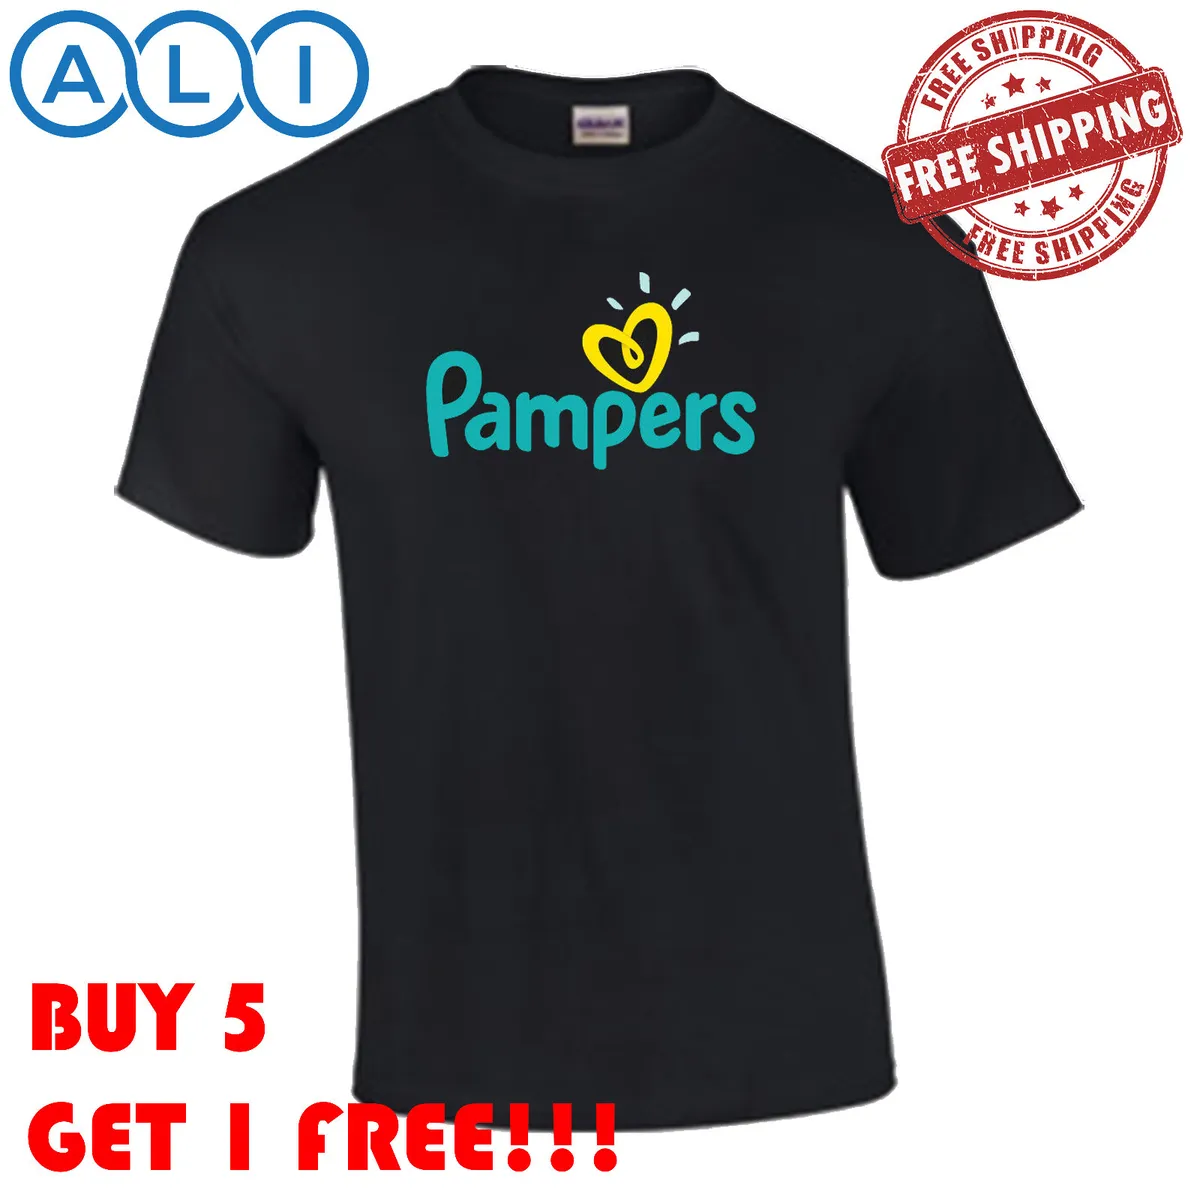 pampers tshirt